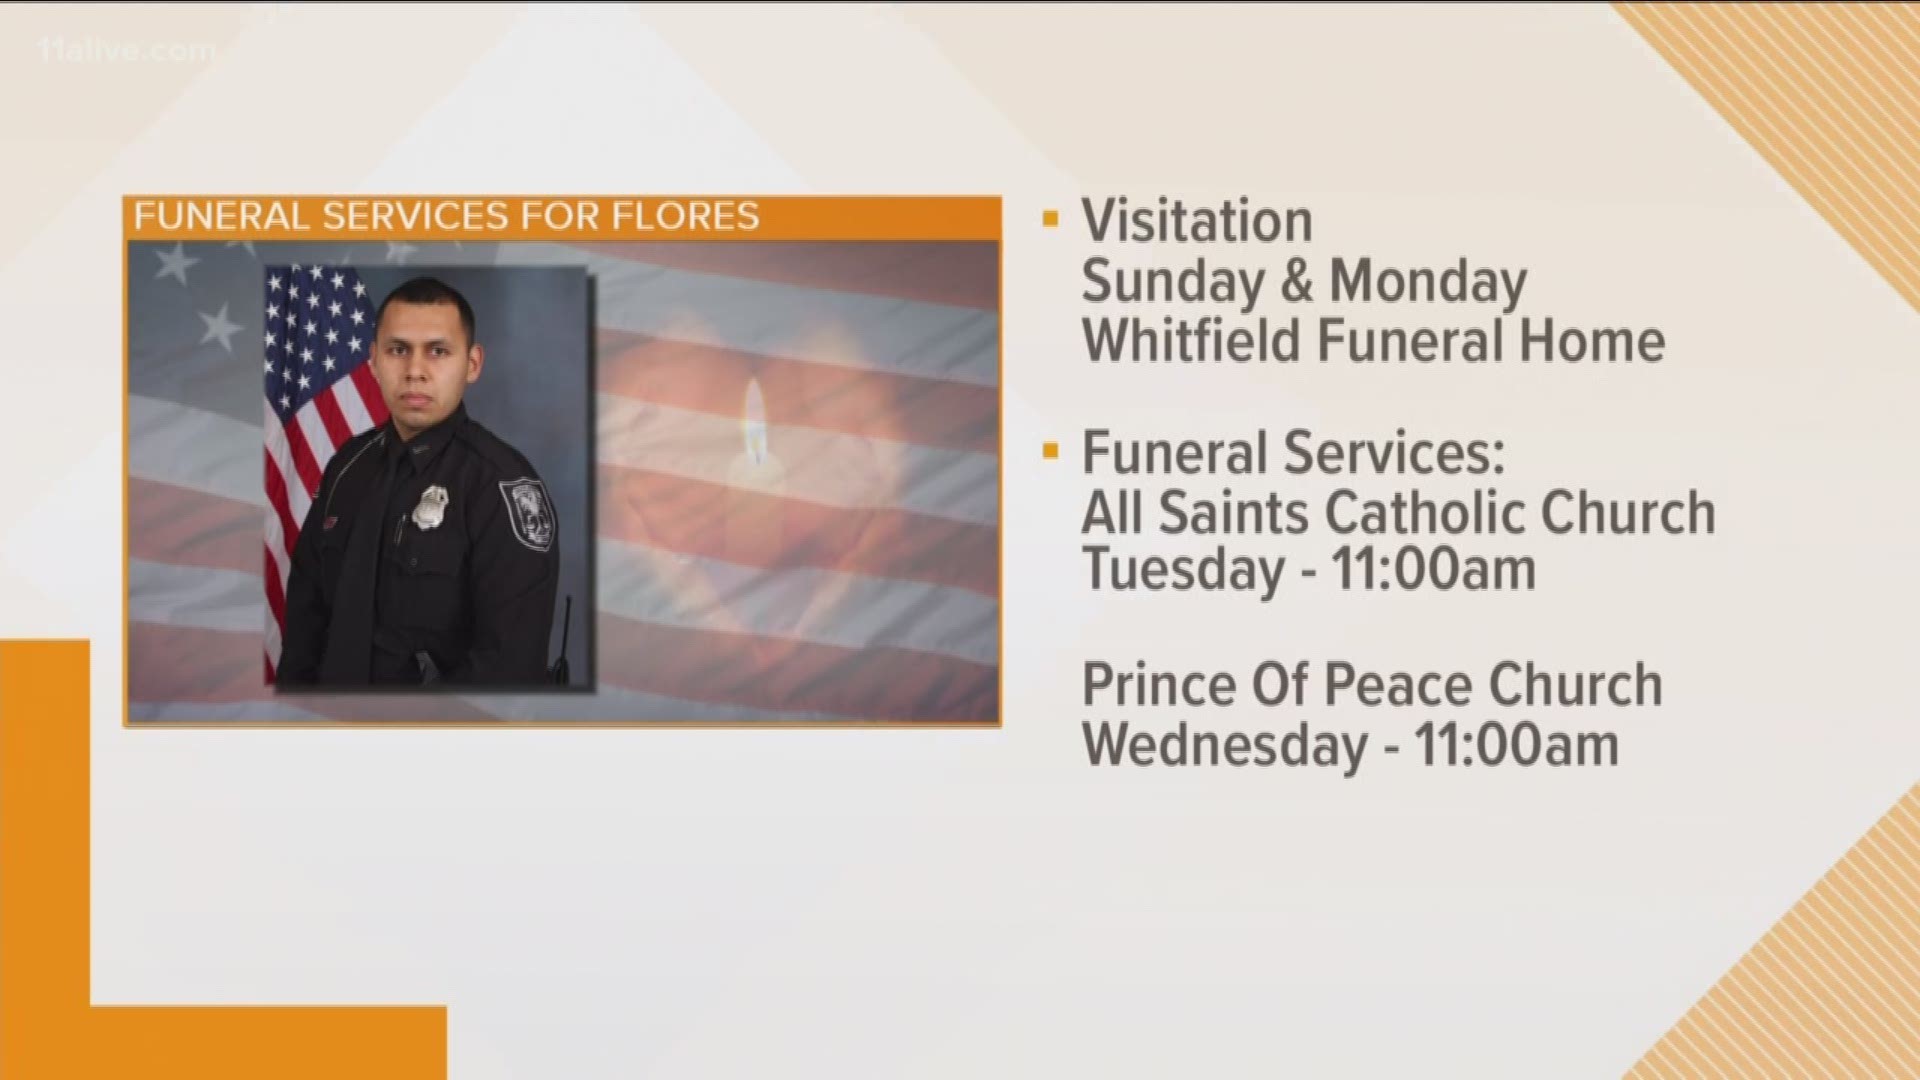 Flores was killed in the line of duty.